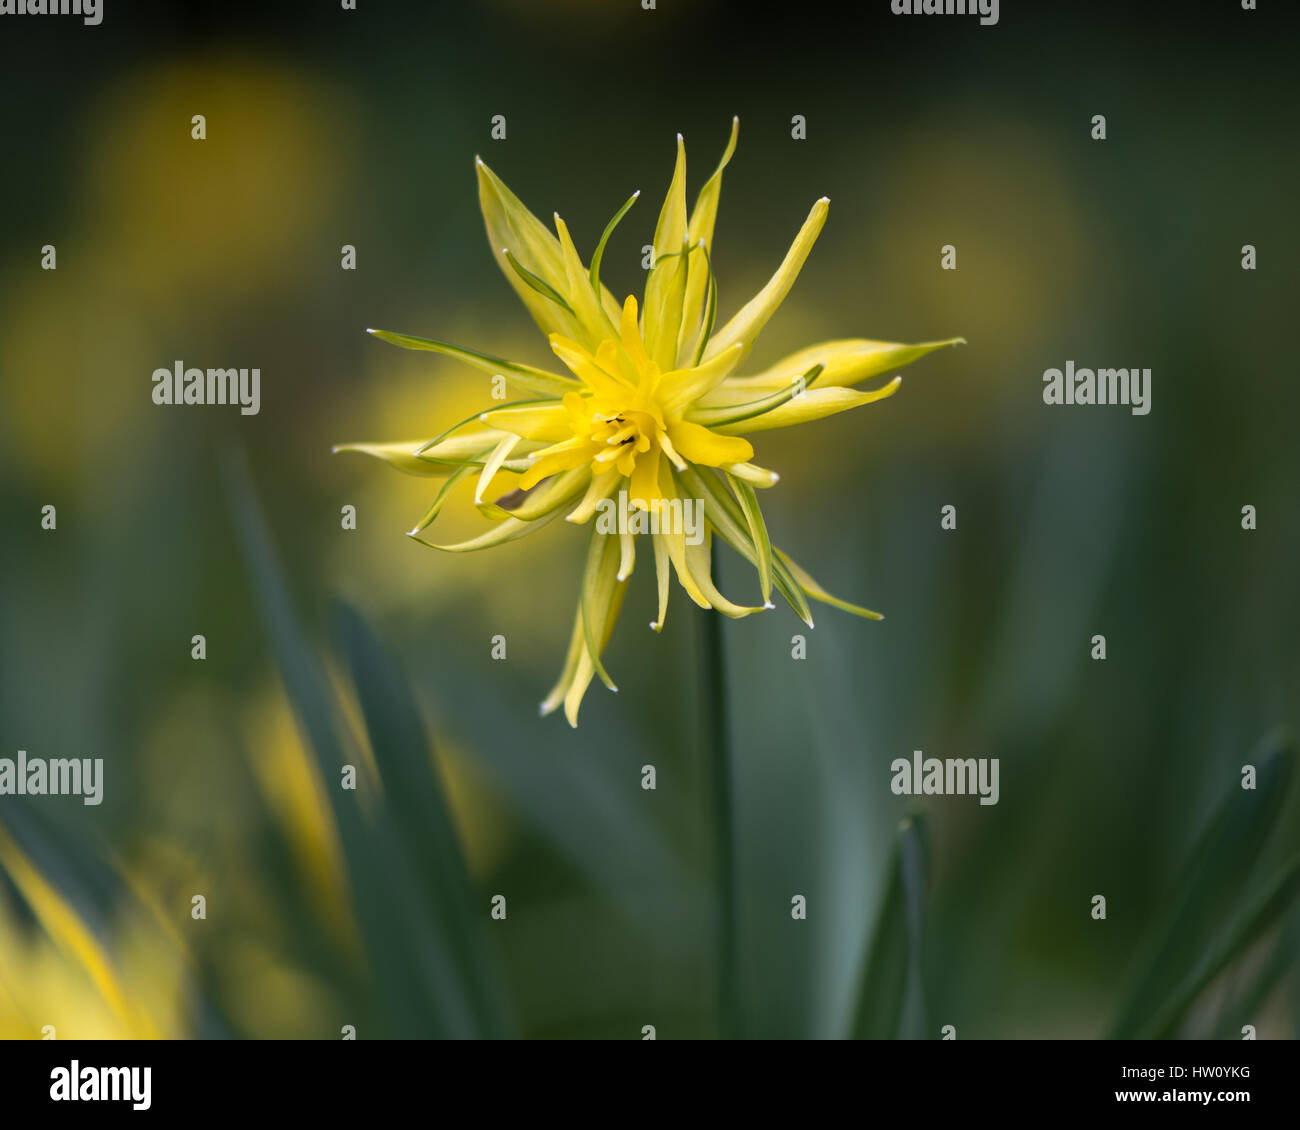 Daffodil Narcissus Rip van winkle flower. Yellow flower of spring perennial plant in the Amaryllidaceae (amaryllis) family Stock Photo